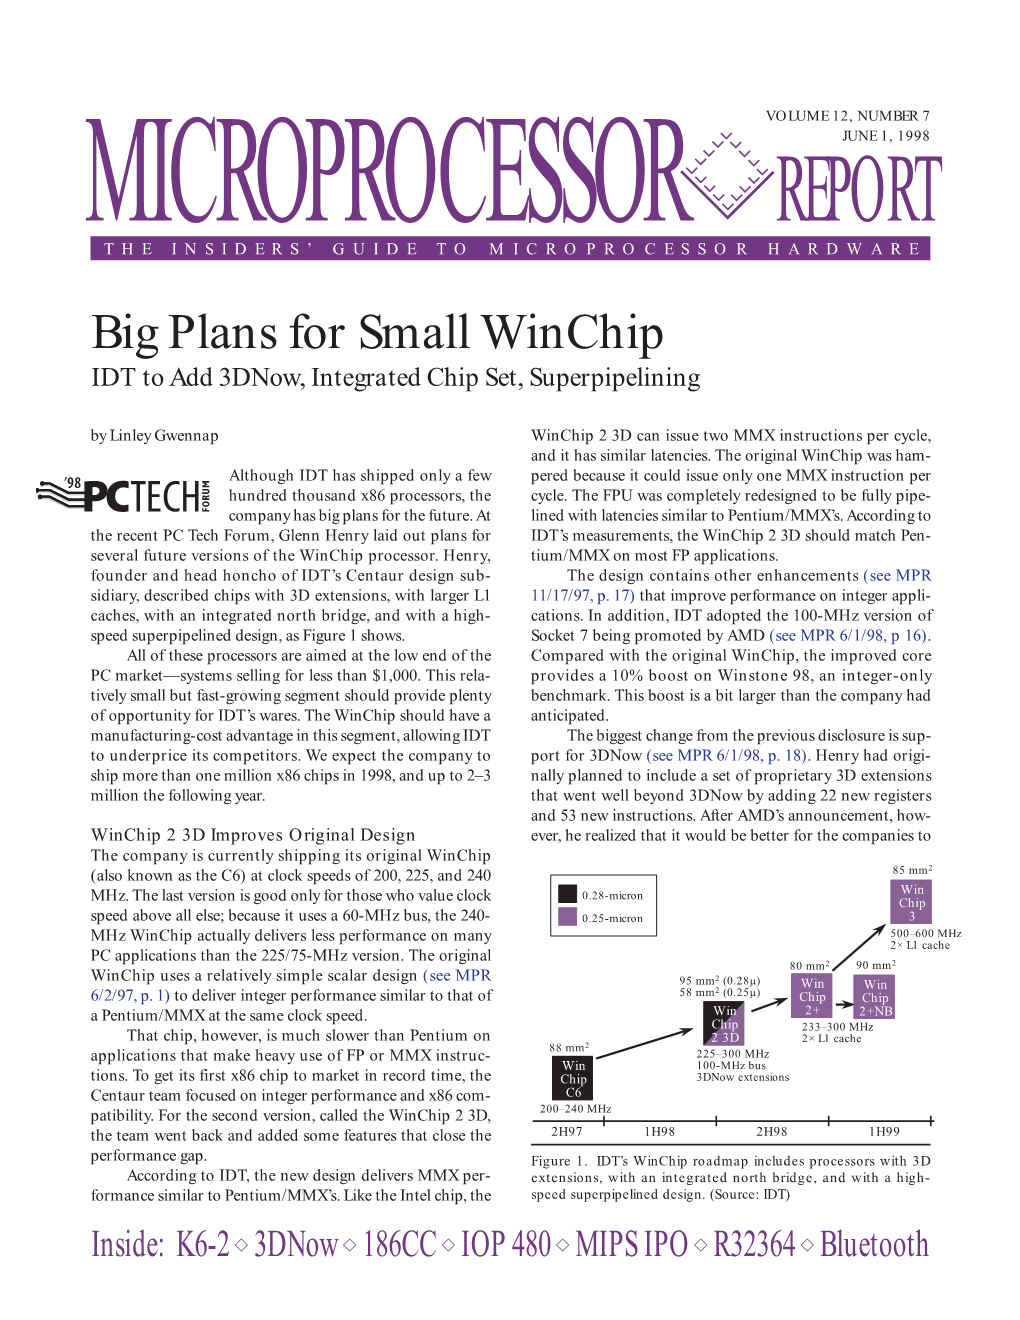 Big Plans for Small Winchip IDT to Add 3Dnow, Integrated Chip Set, Superpipelining